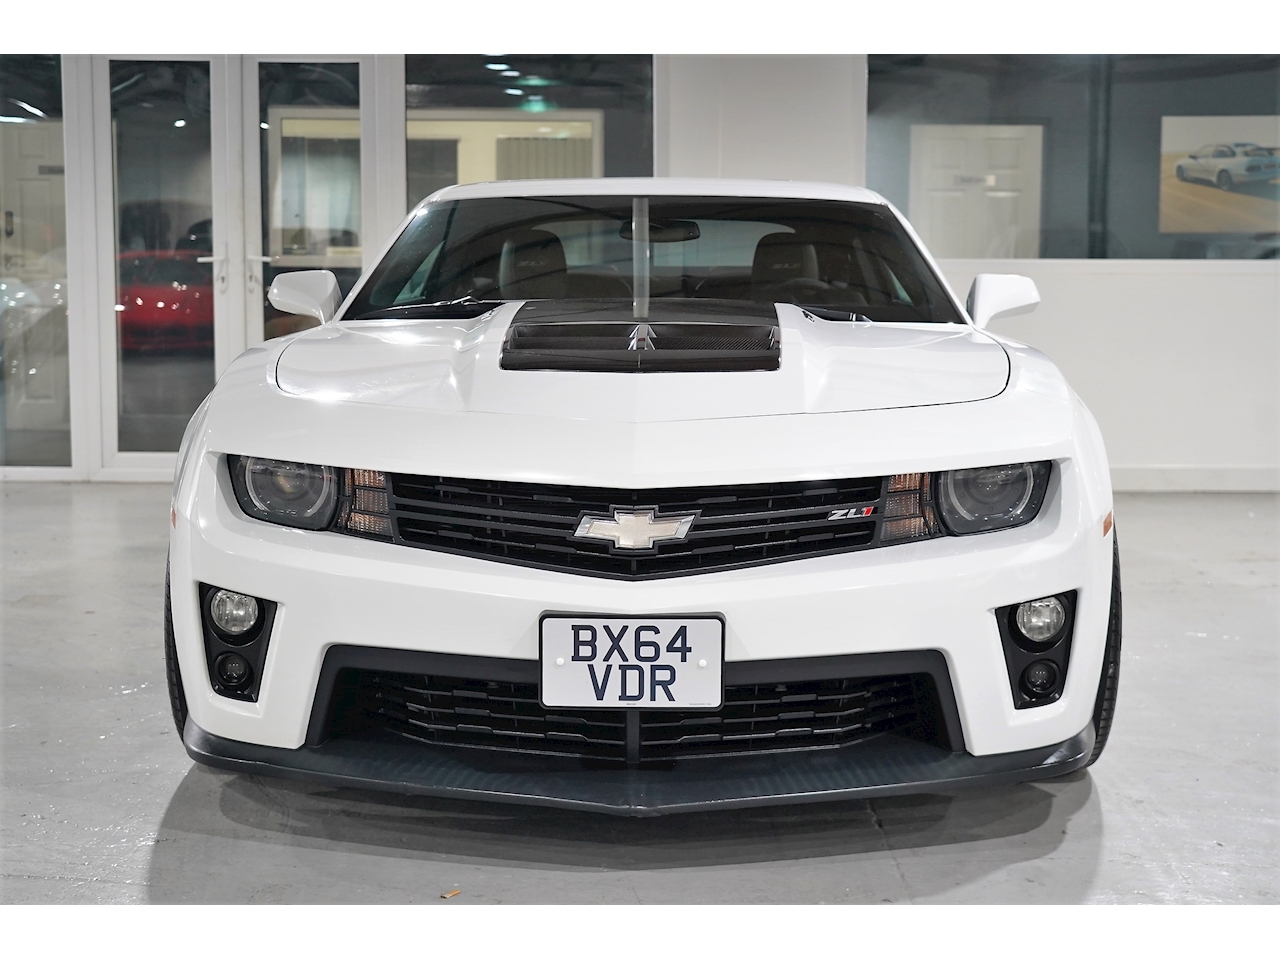 2015 Chevrolet Camaro ZL1 - Factory Supercharged 580 LSA - Left Hand Drive